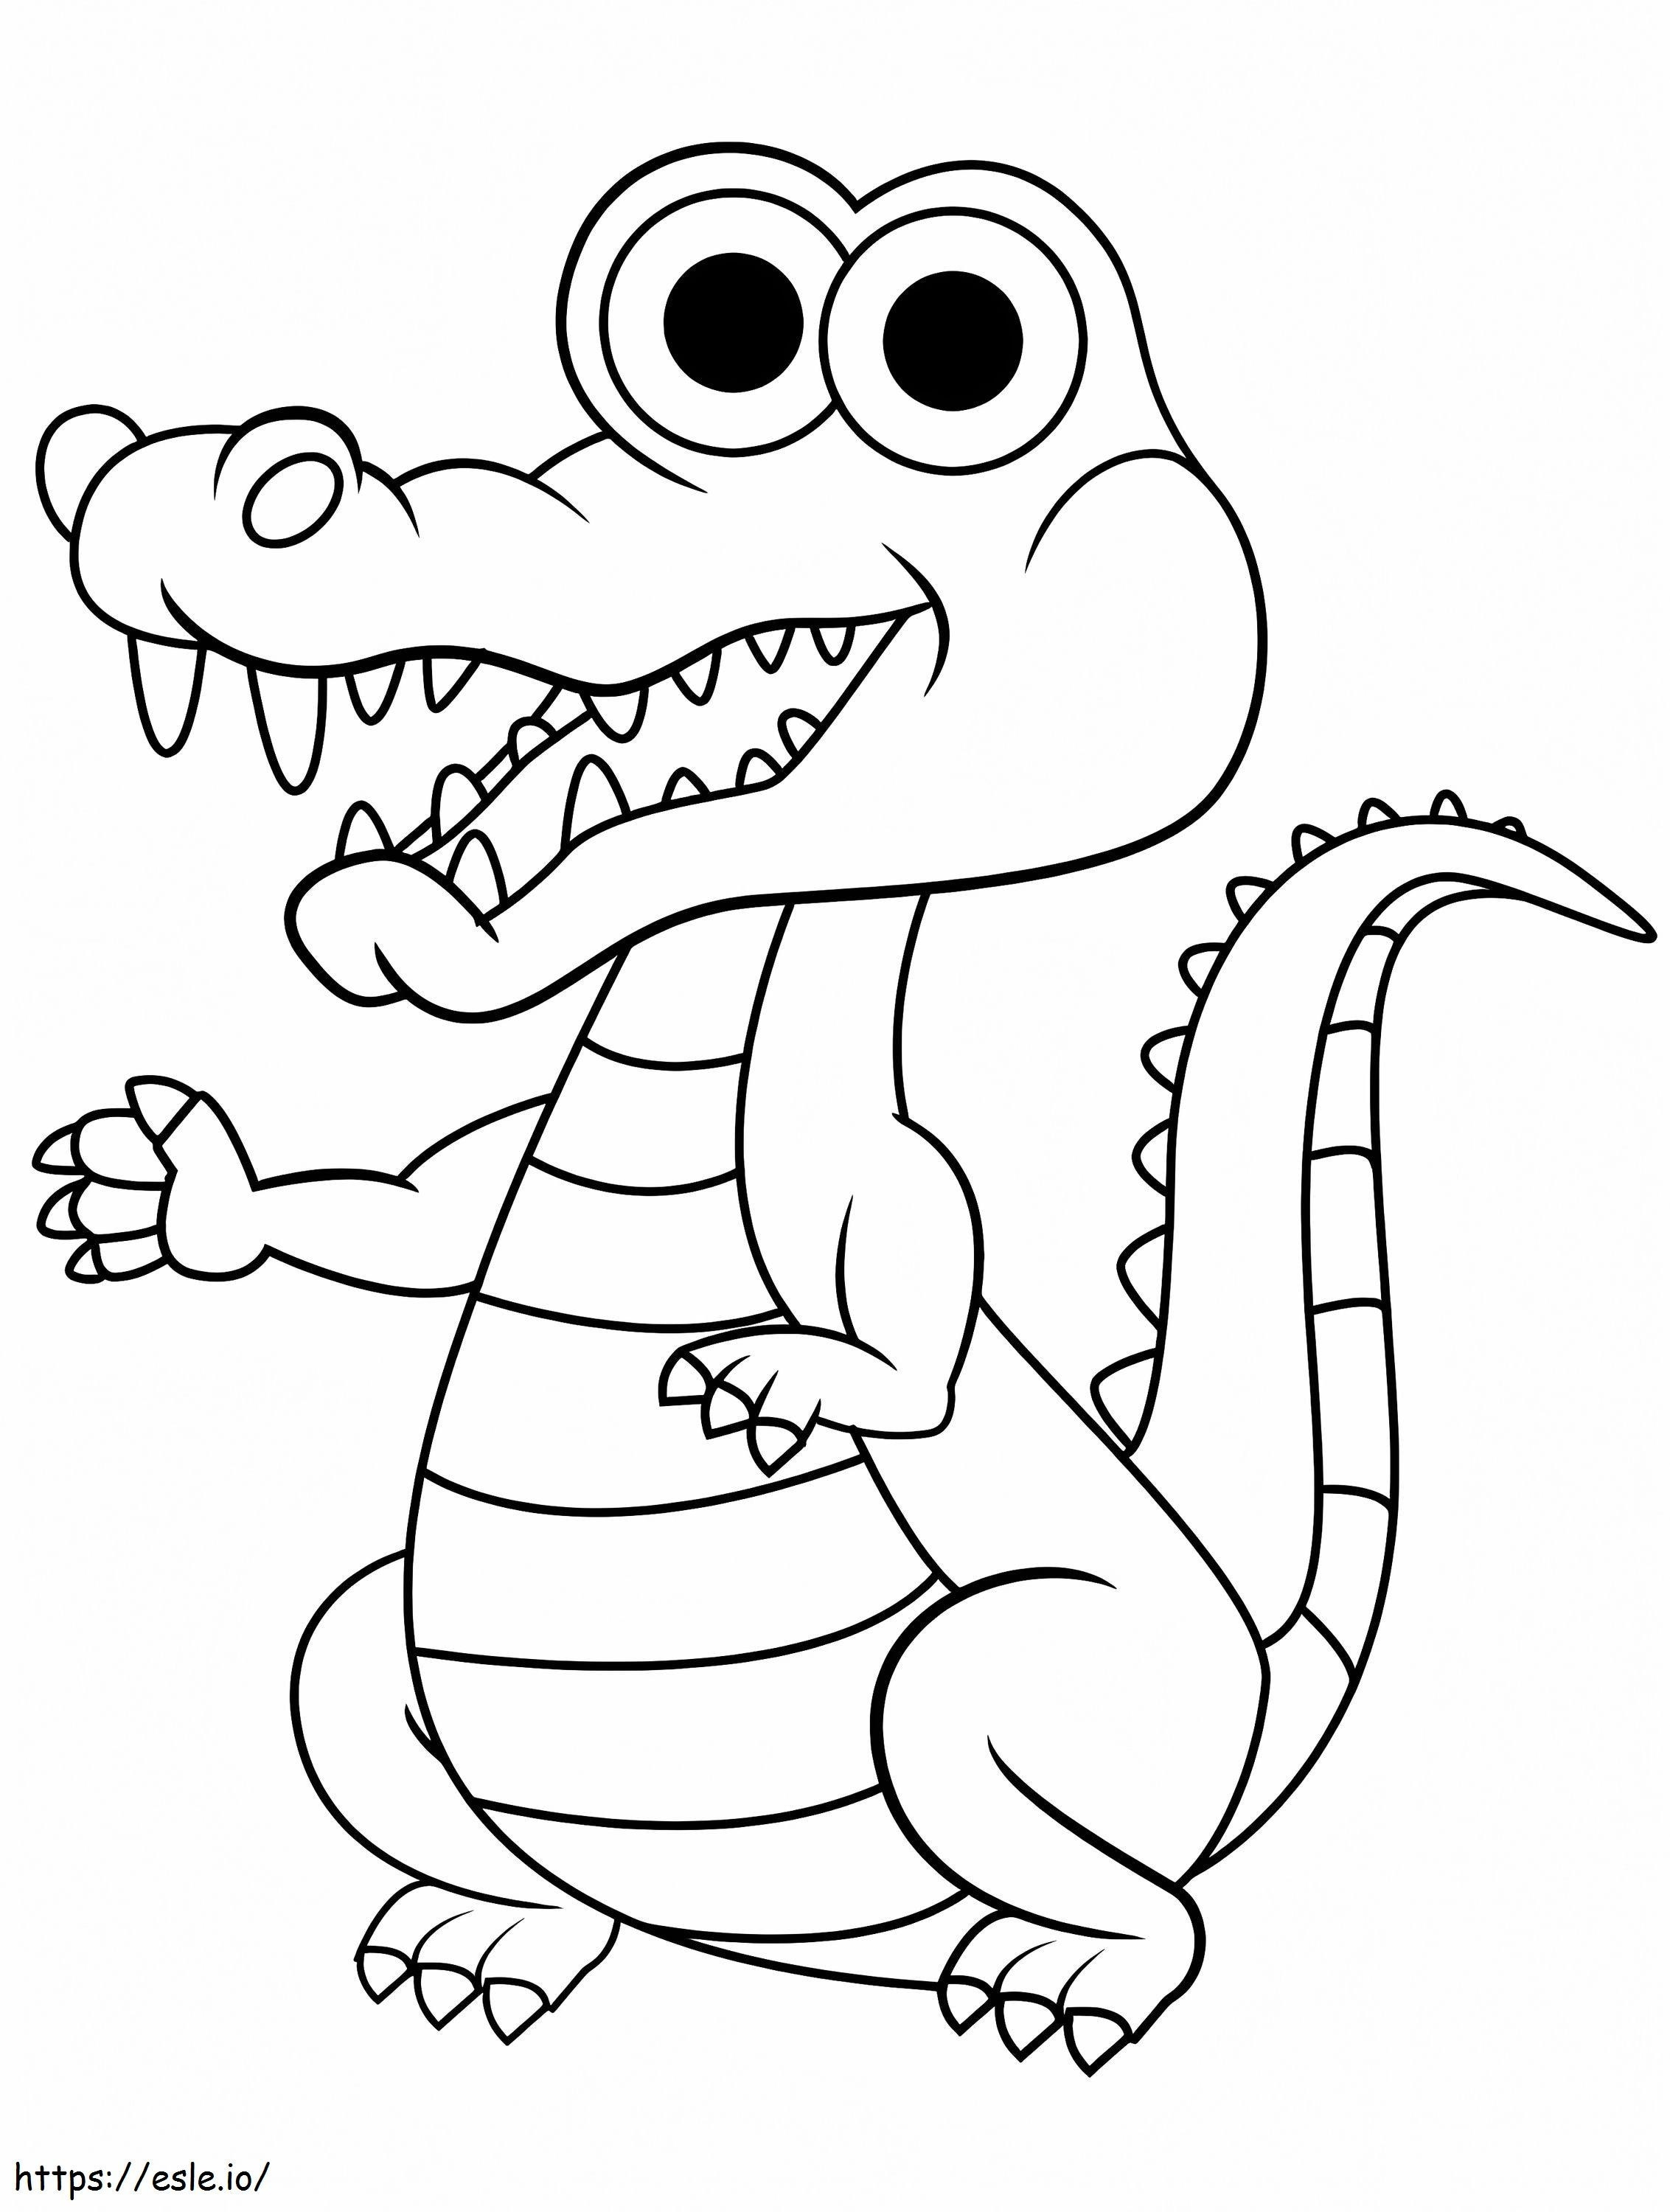 Cute Alligator coloring page